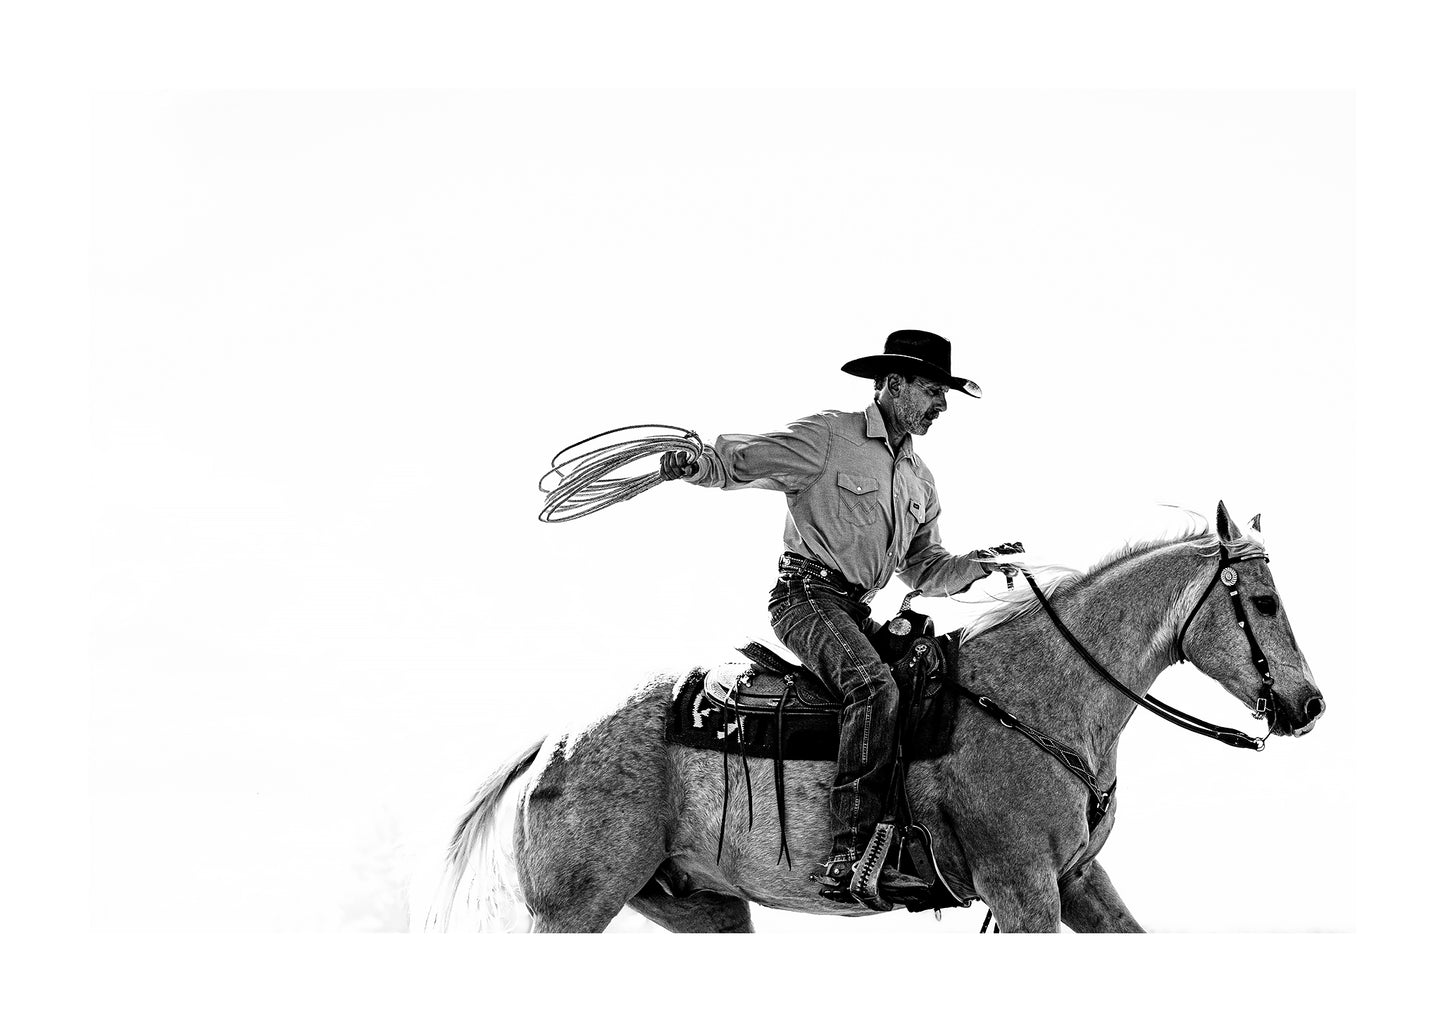 "Wrangler" black and white cowboy photography print for sale. 